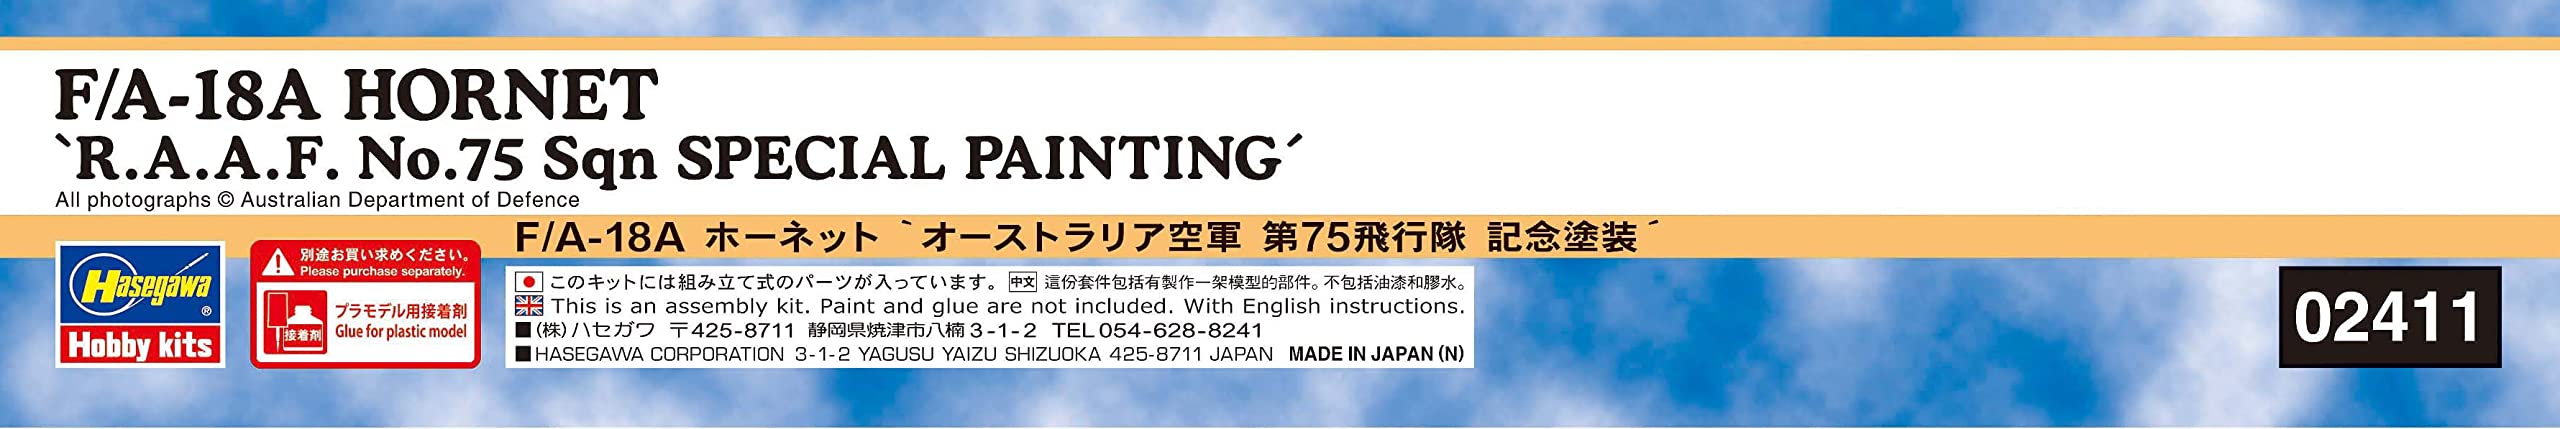 Hasegawa 1/72 F/A-18A Hornet 'RAAF No.75 Special Painting' Model Kit 02411 NEW_4